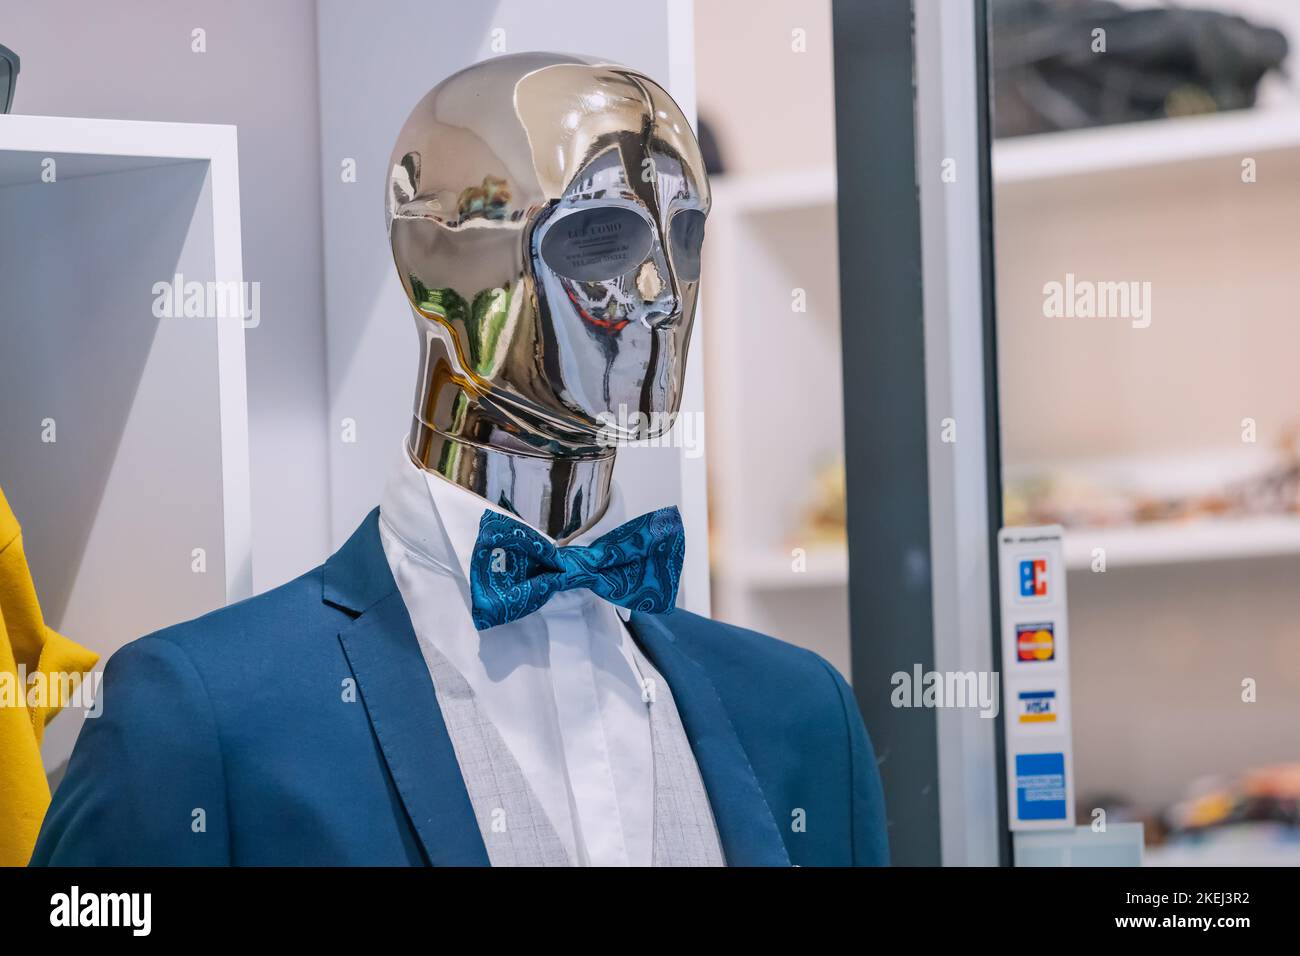 26 July 2022, Munster, Germany: Men suit with bow tie on a mannequin in ...